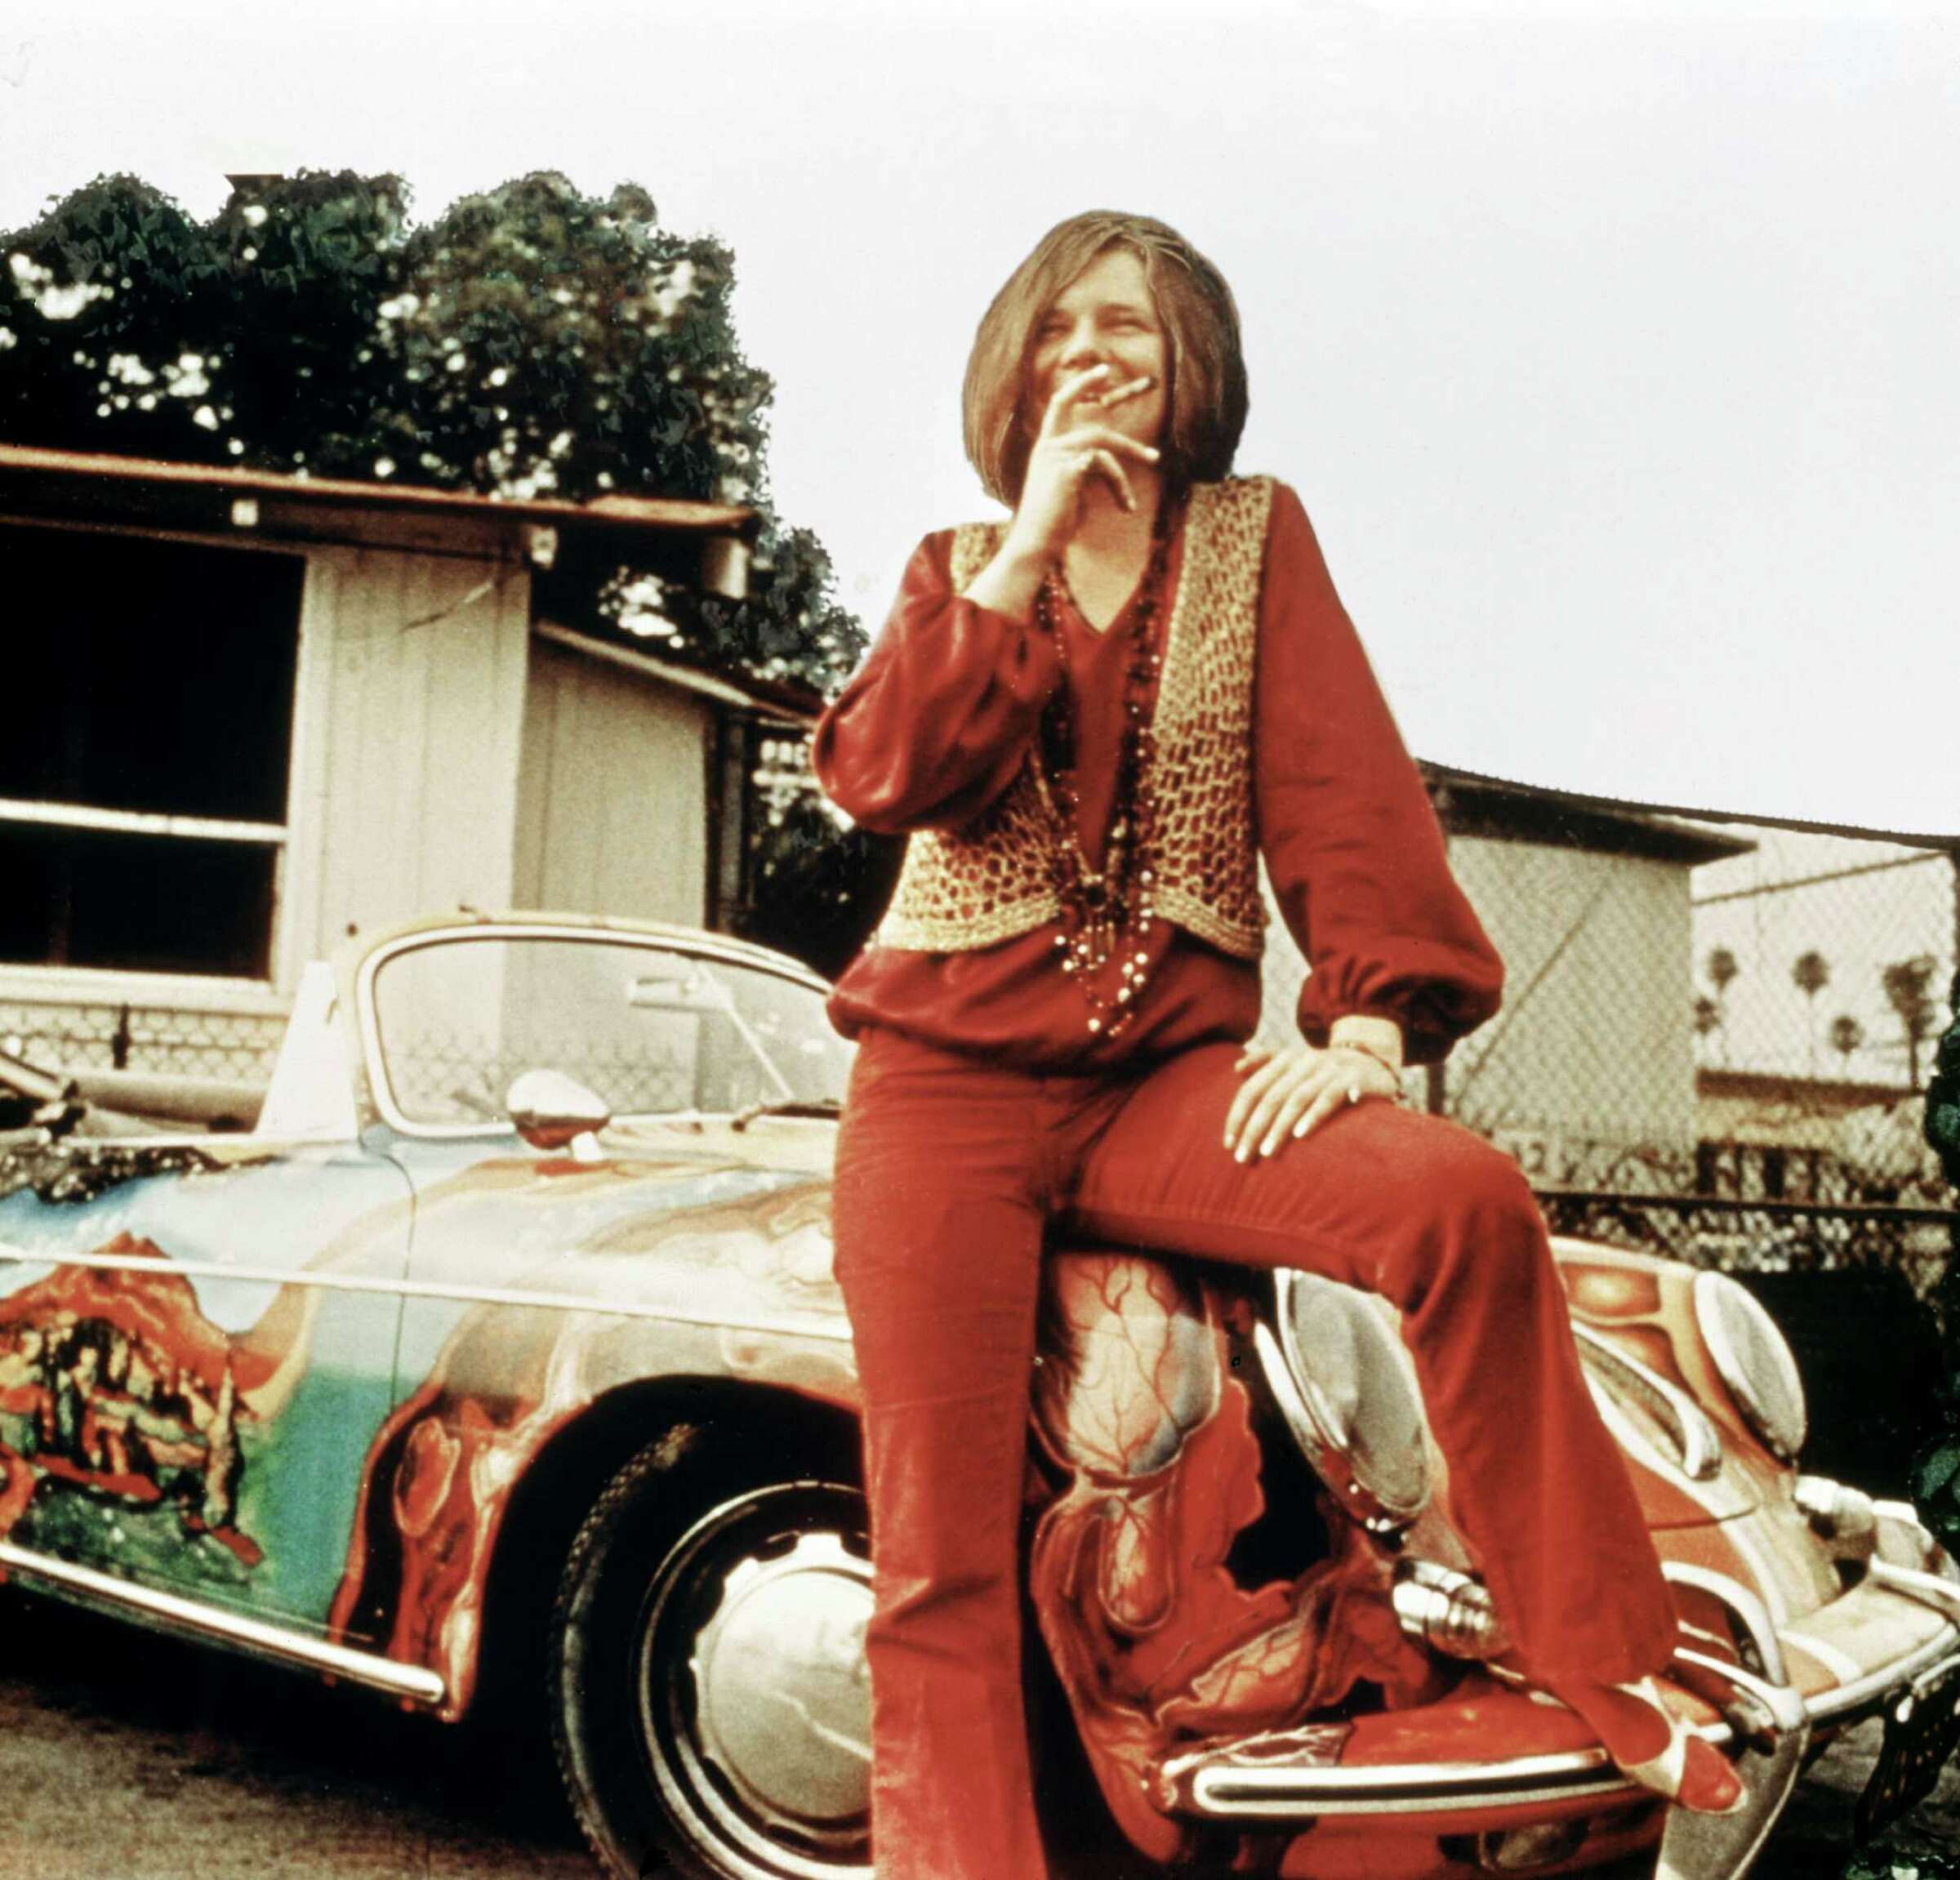 Today Is Texan Janis Joplins Birthday And Her Iconic Boho Style Endures Decades After Her Death 1063